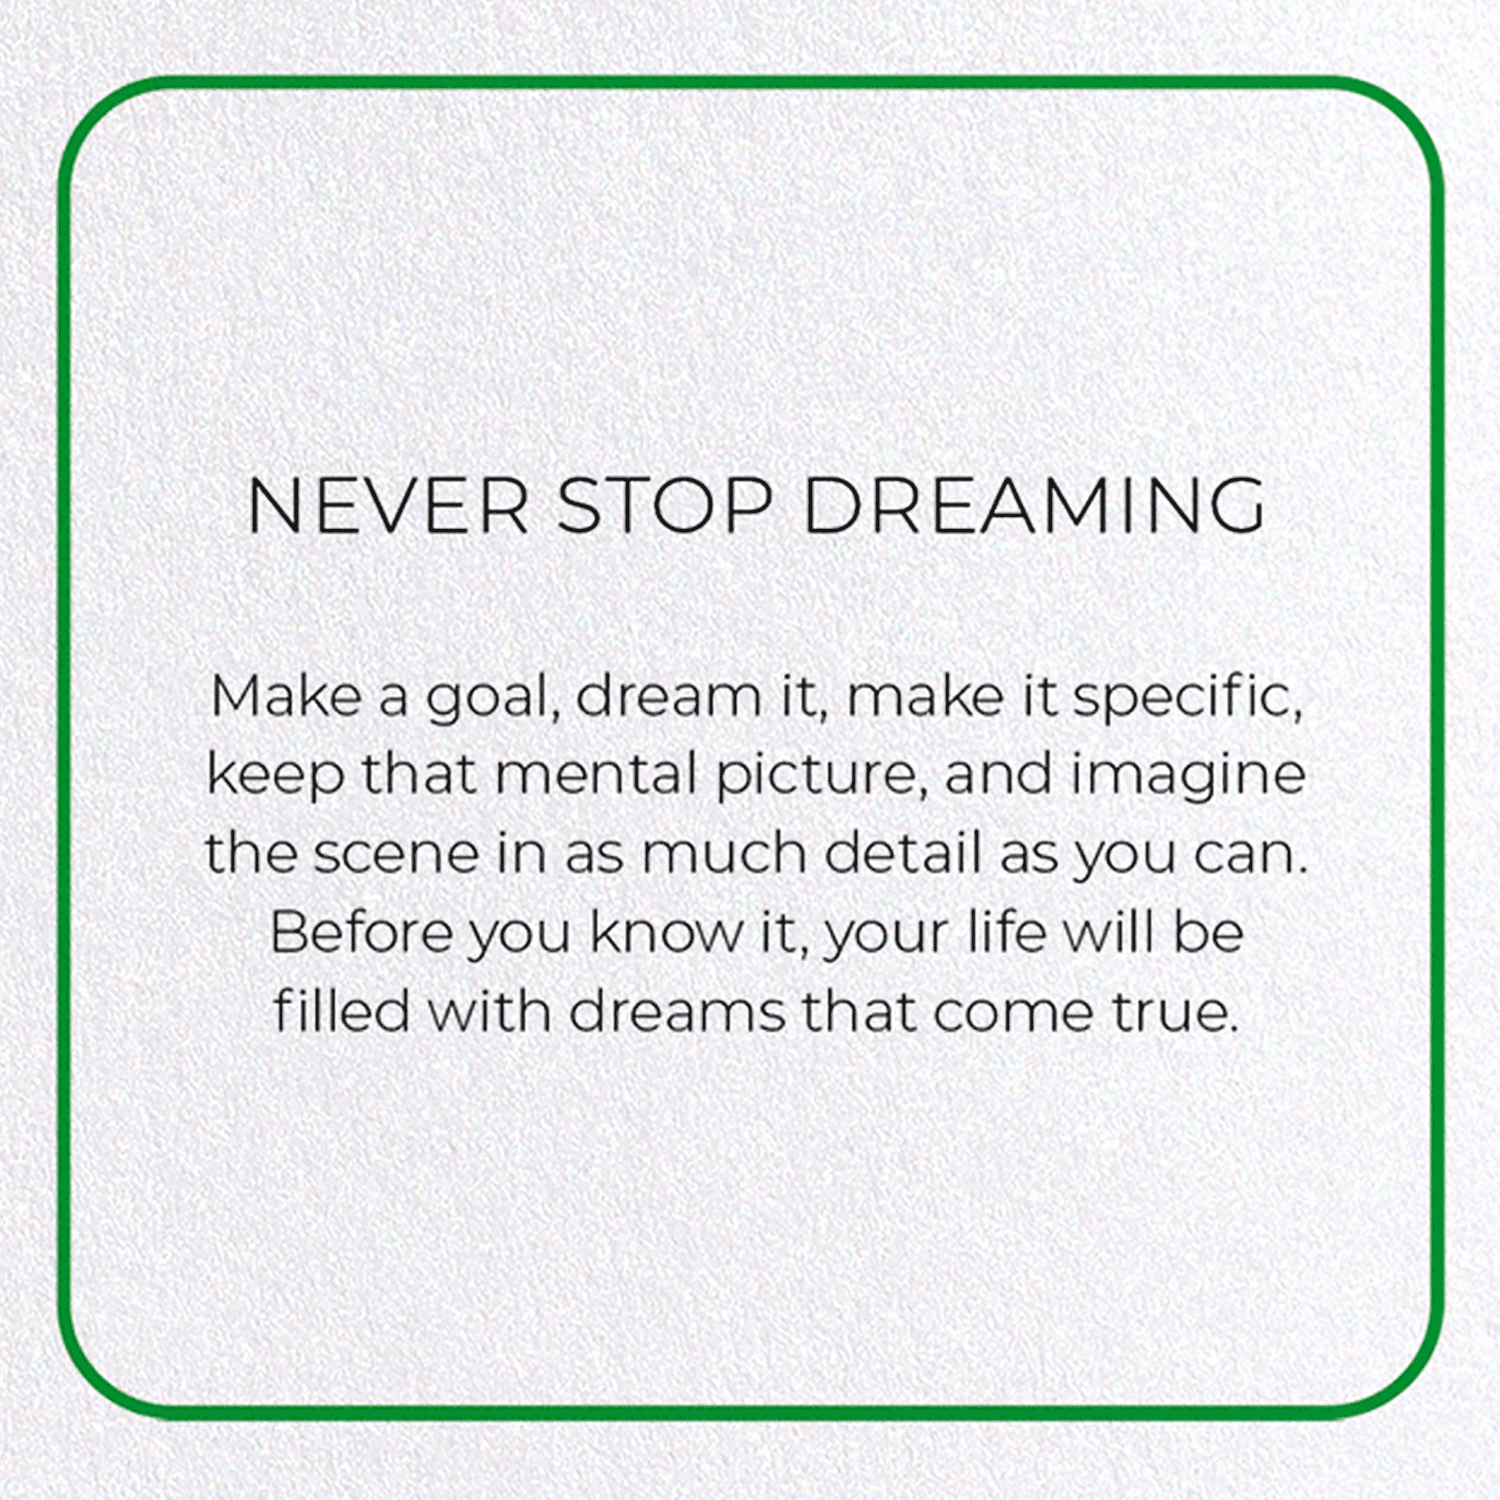 NEVER STOP DREAMING: Photo Greeting Card